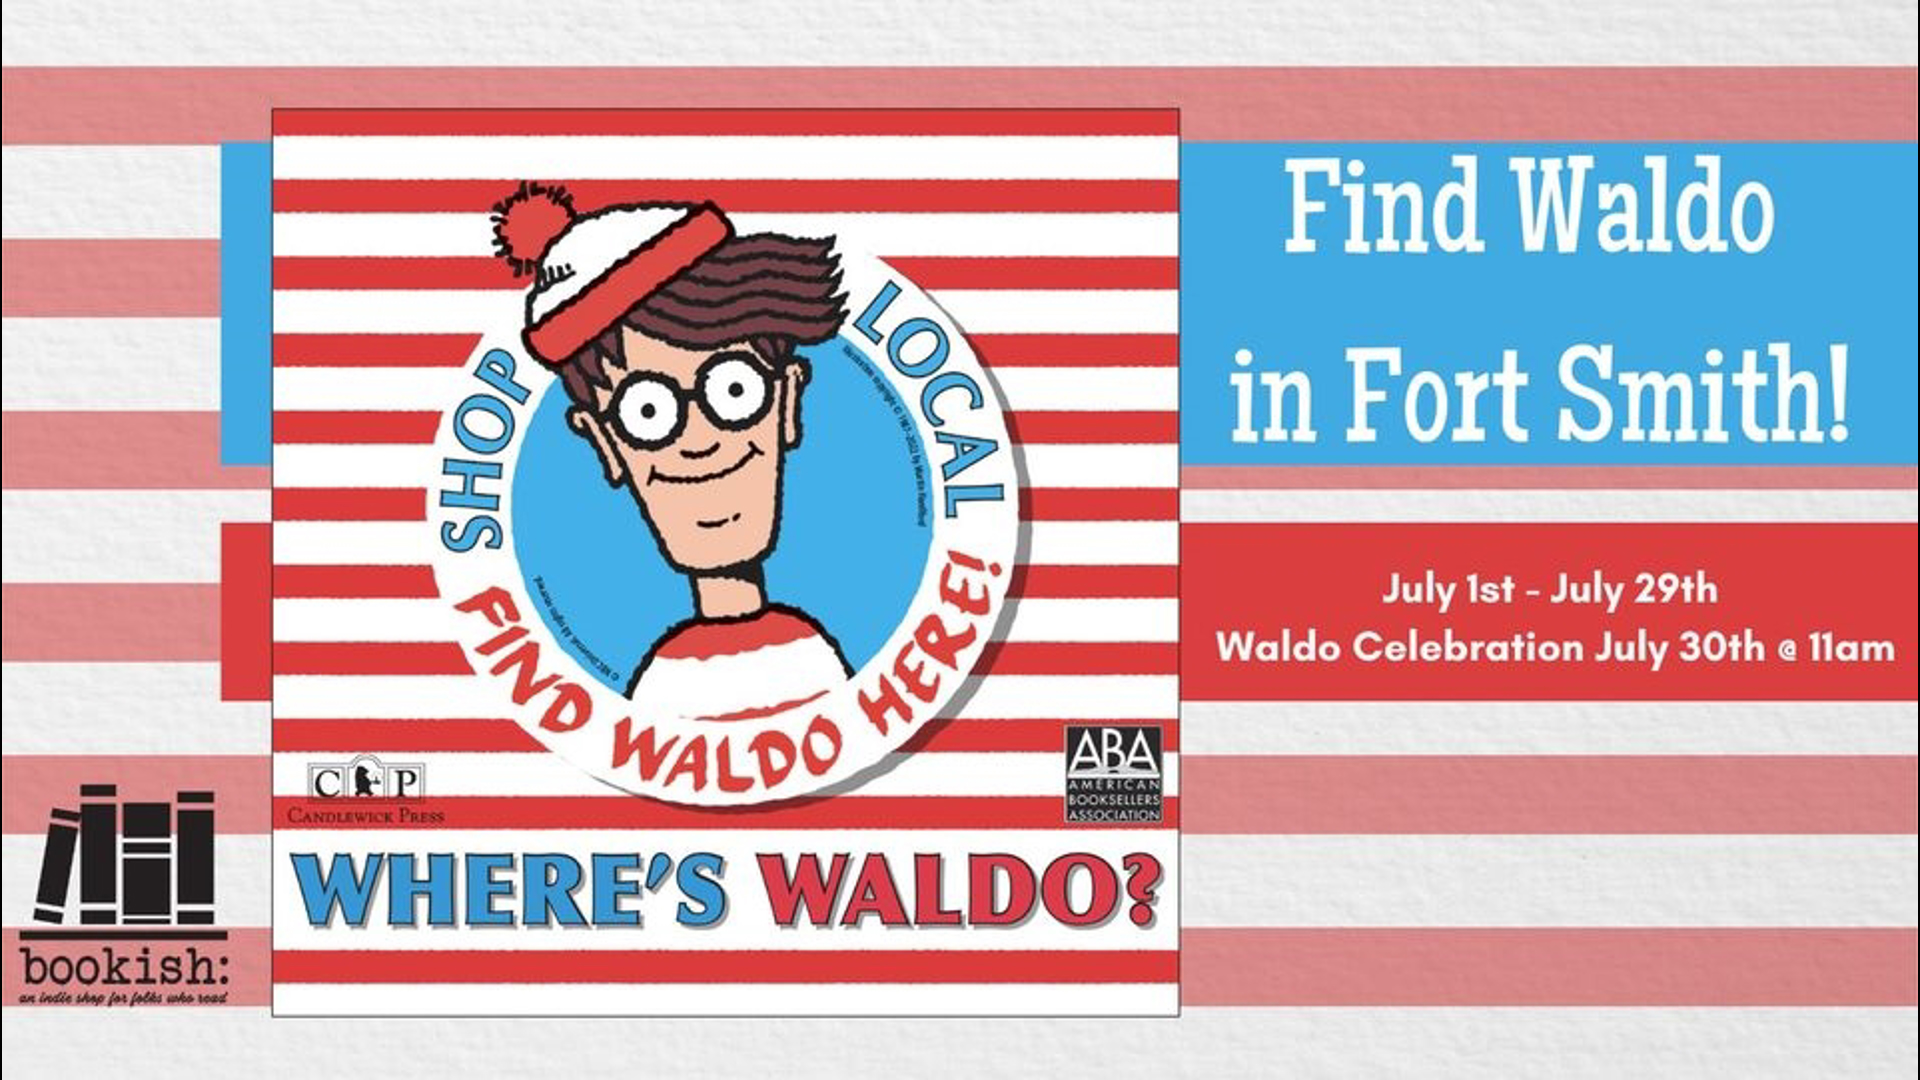 Bookish in Fort Smith is teaming up with some downtown Fort Smith businesses to find Waldo in Fort Smith.